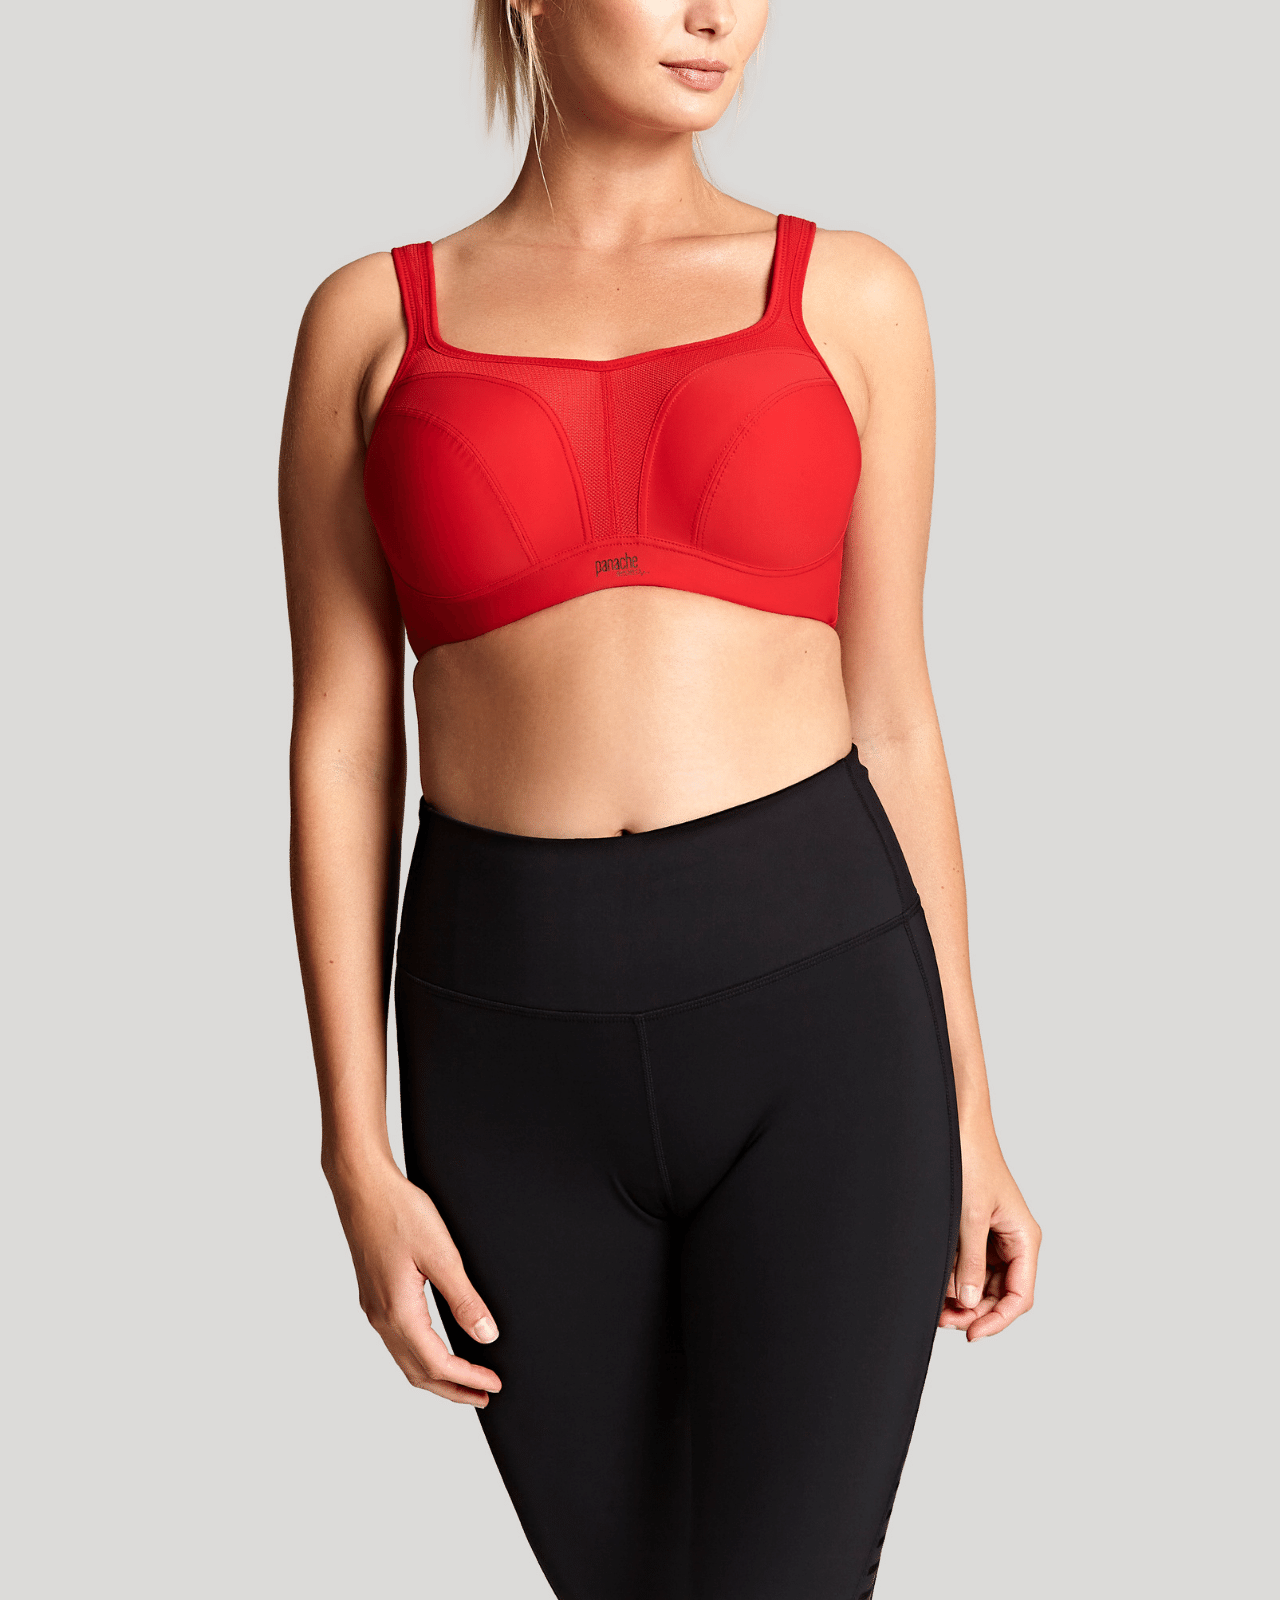 Panache Wired Sports Bra in Fiery Red, worn by model in front view product image.Panache Wired Sports Bra - Fiery Red worn by model front view